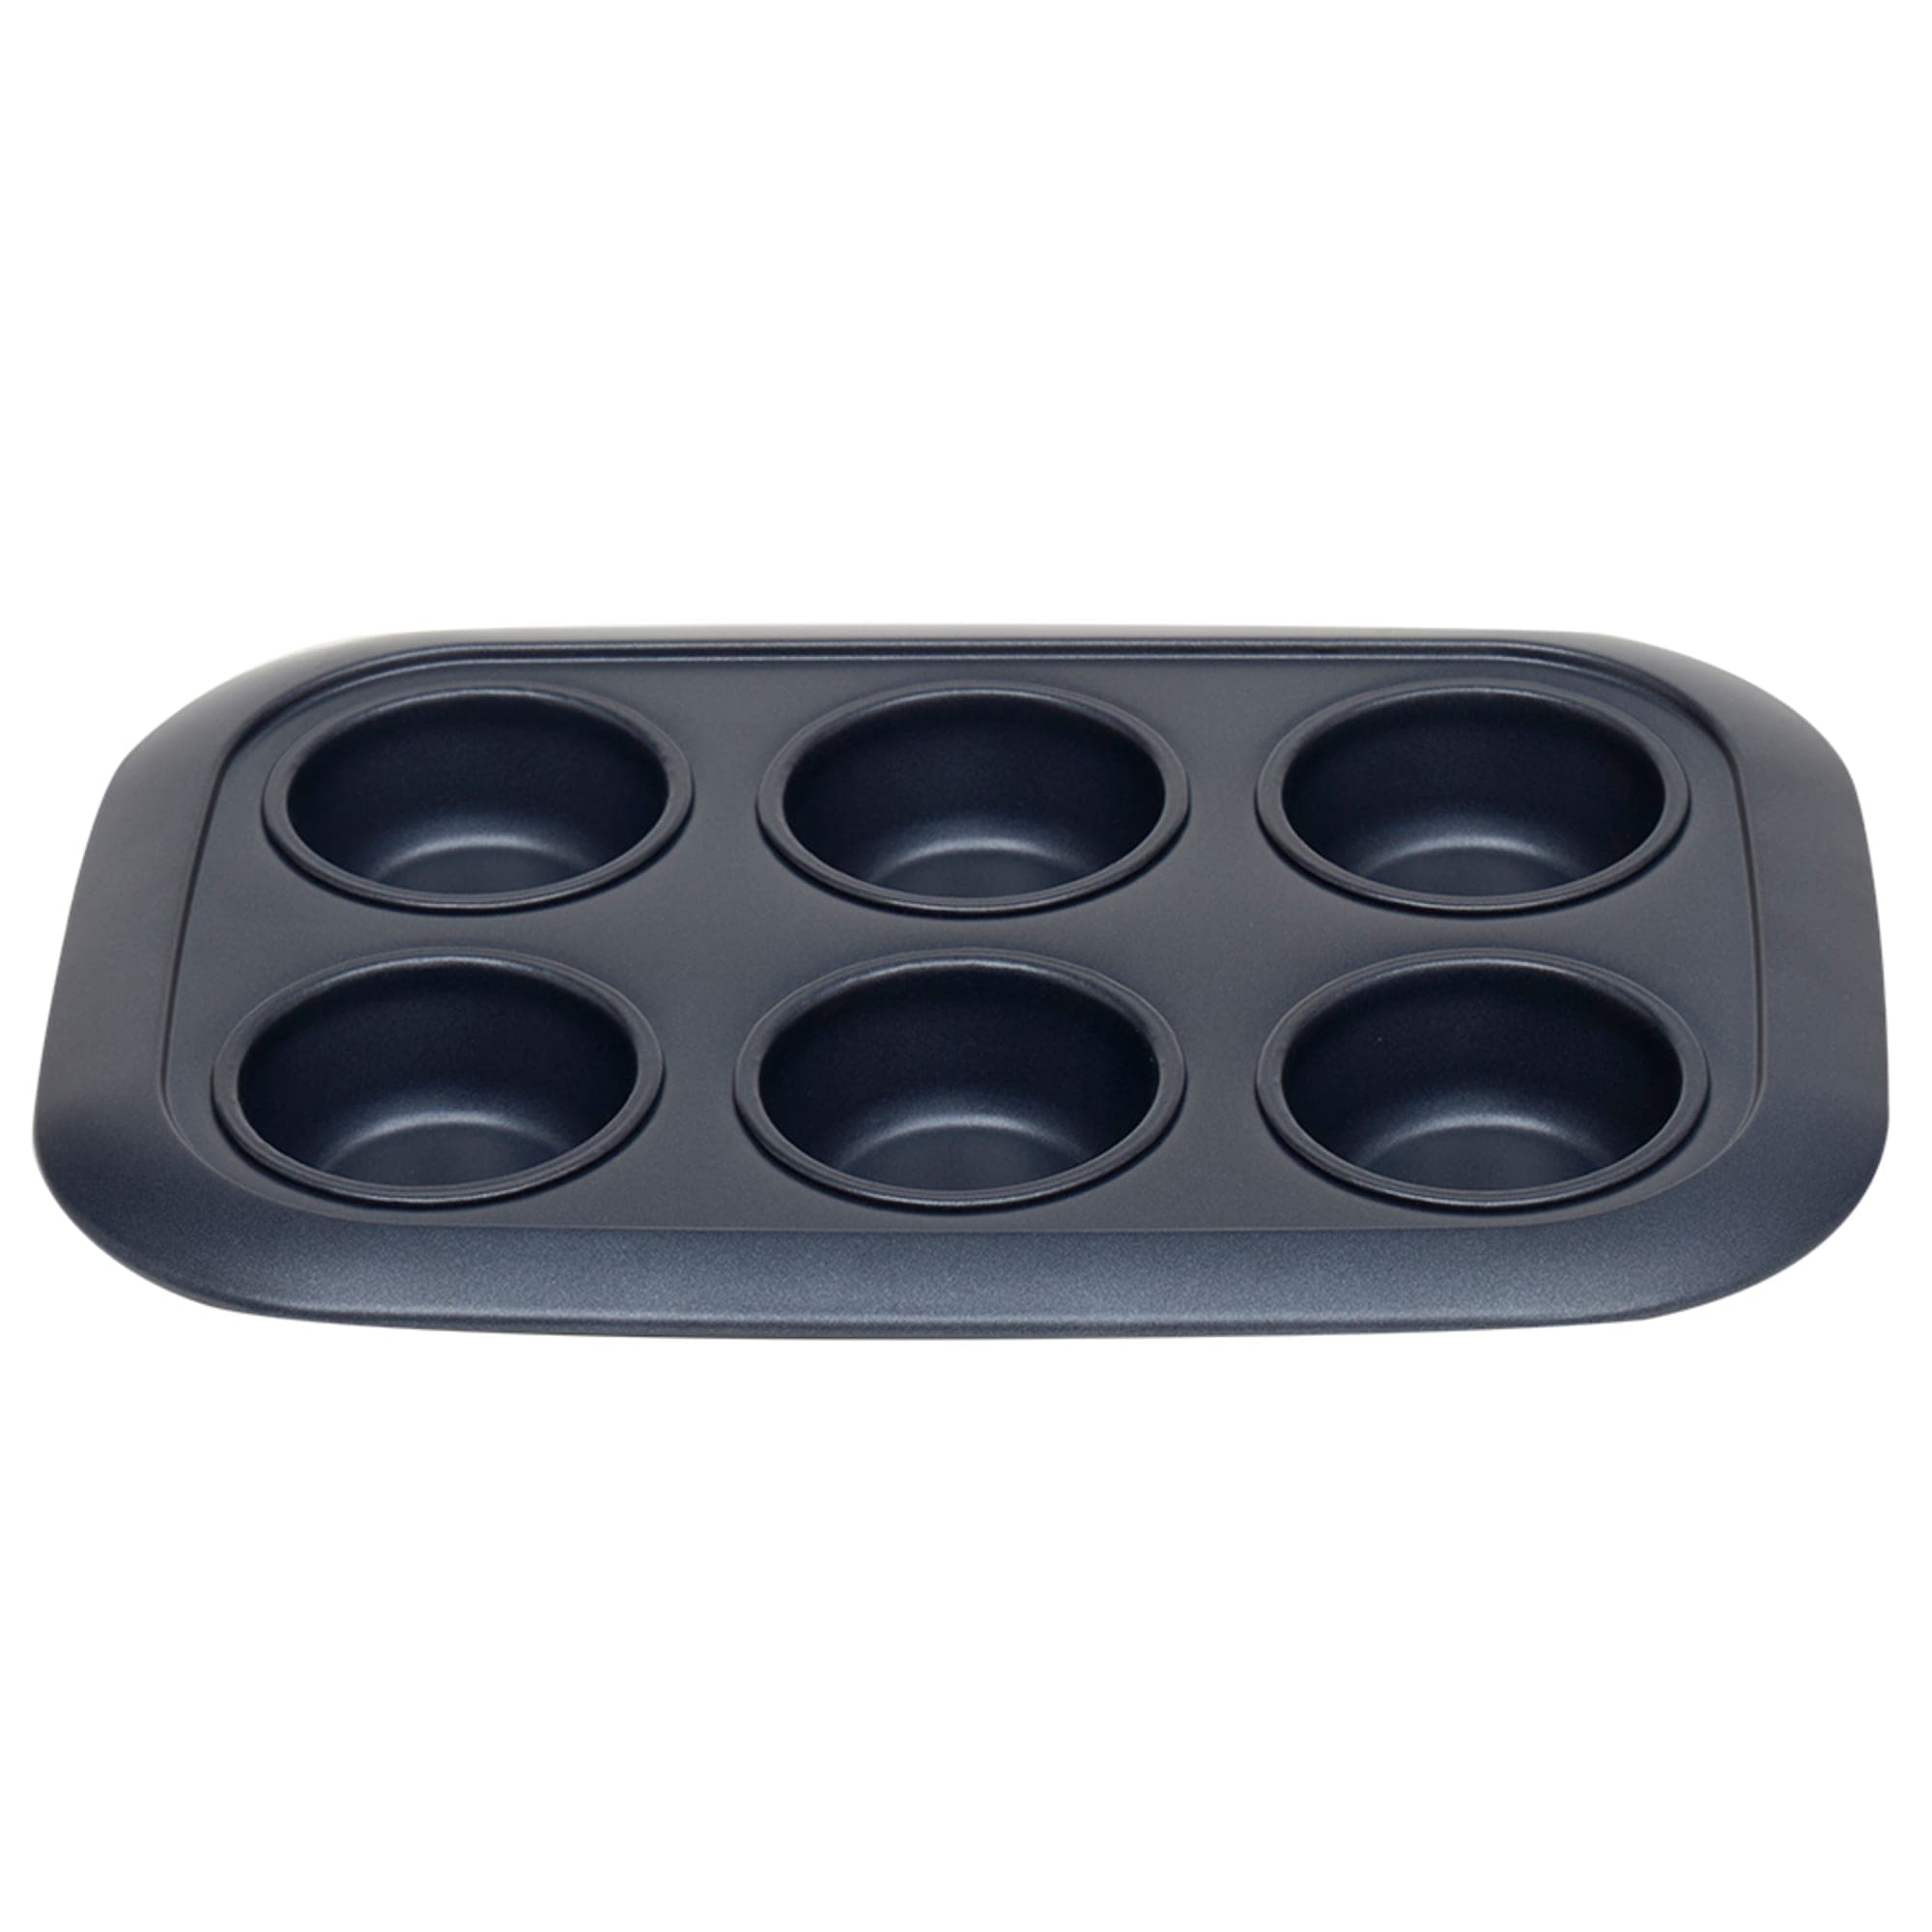 Michael Graves Design Textured Non-Stick 6 Cup Carbon Steel Muffin Pan, Indigo $5.00 EACH, CASE PACK OF 12